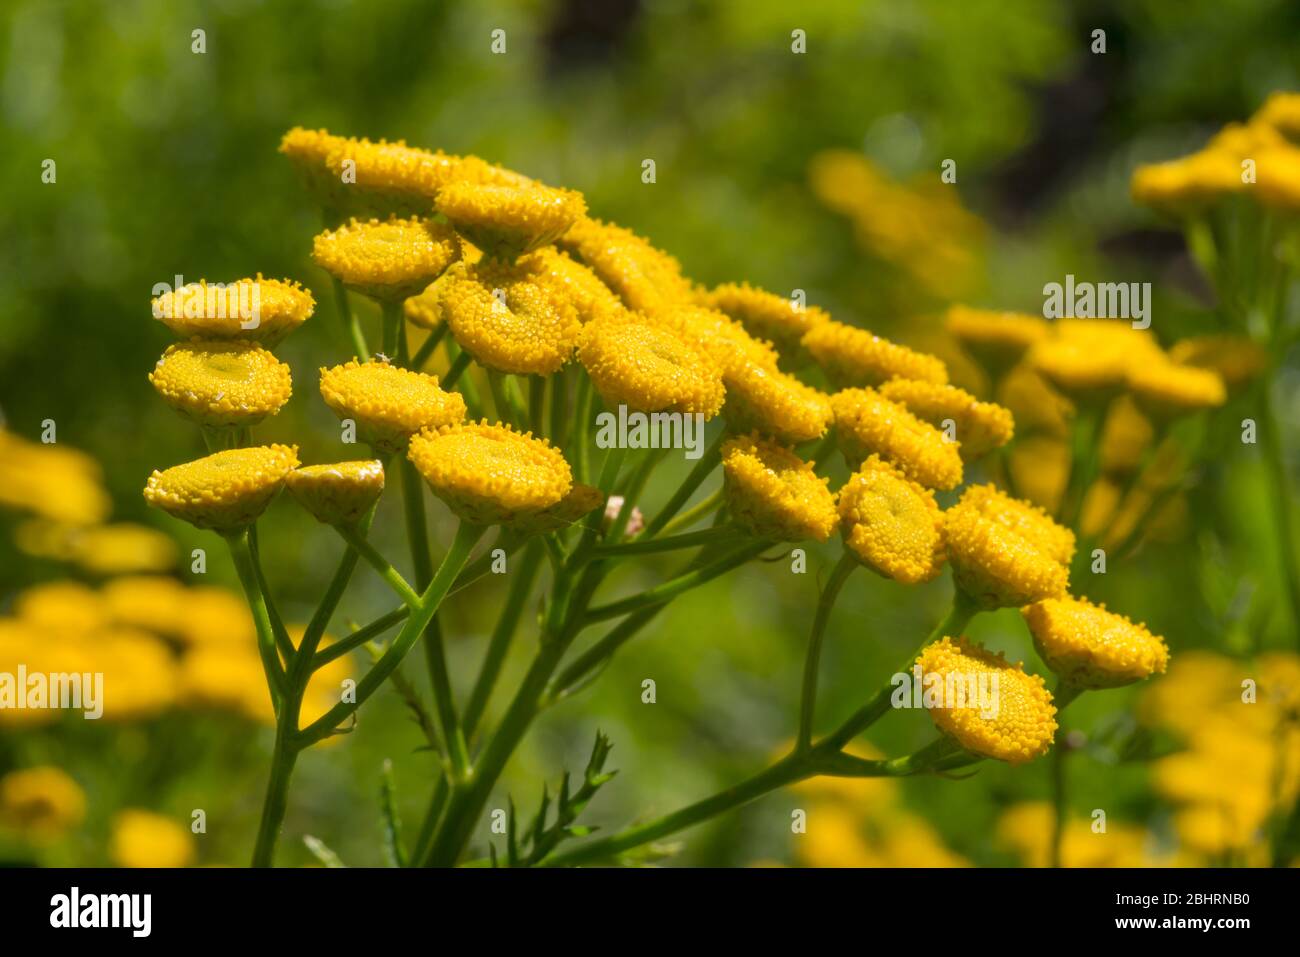 Tansy | Dilston Physic Garden | August 2016 Stock Photo